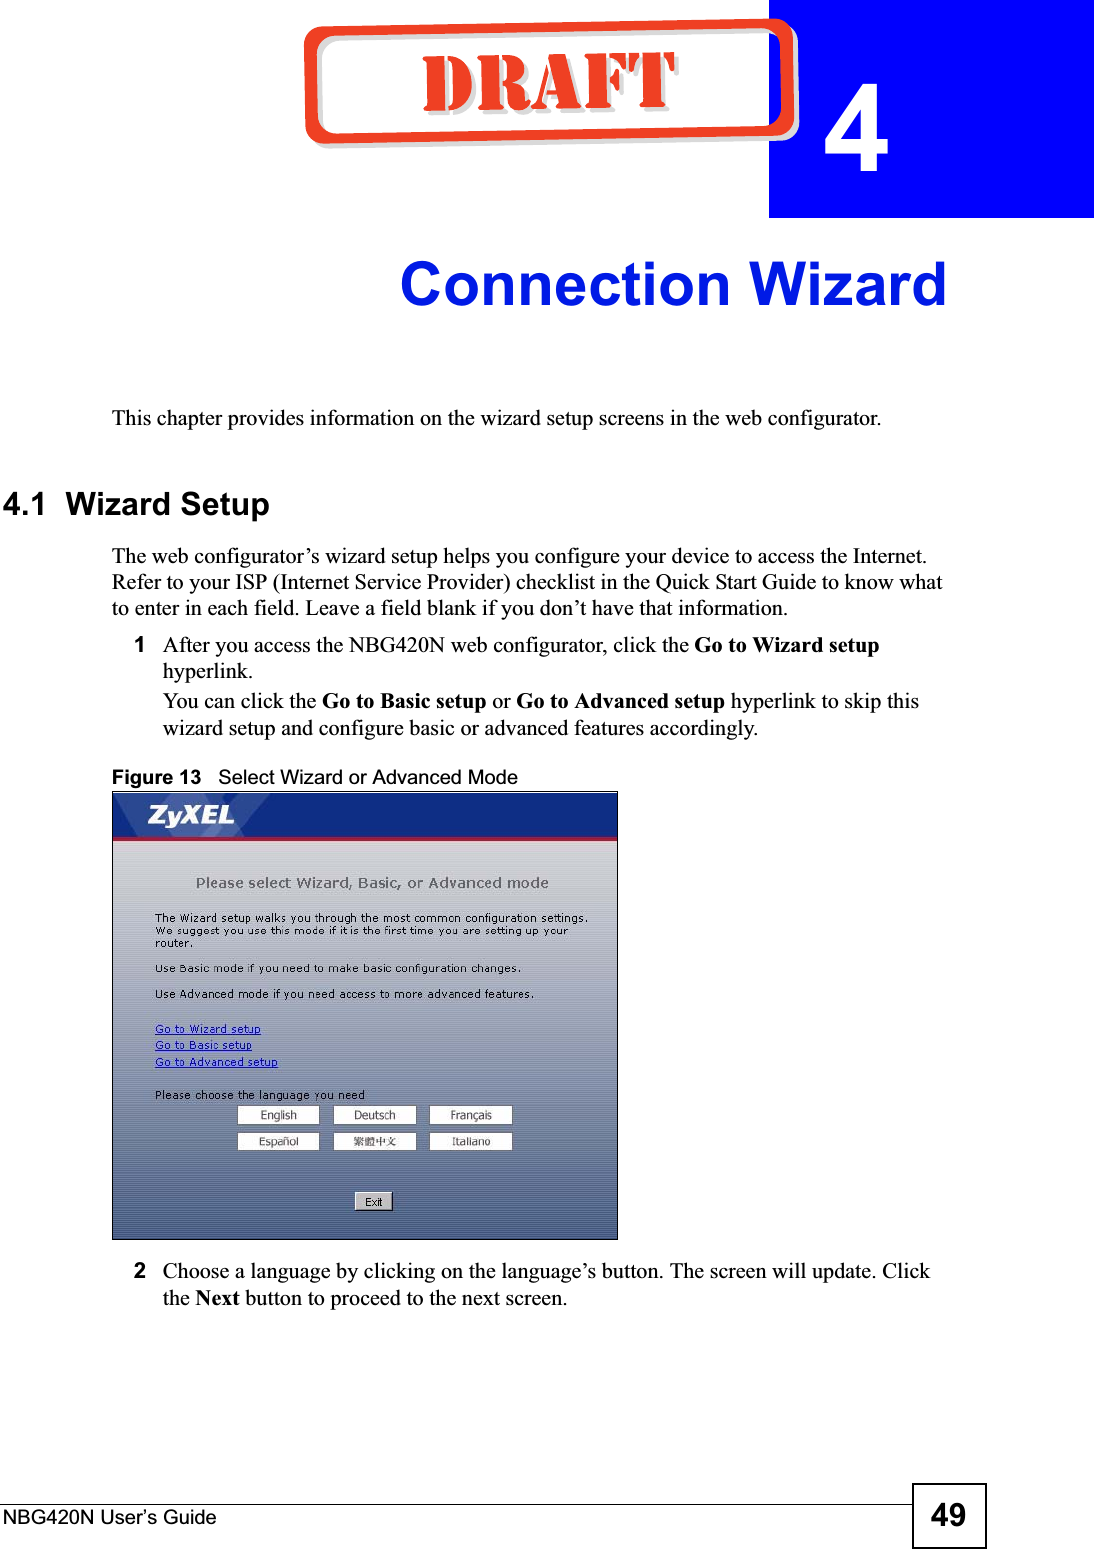 NBG420N User’s Guide 49CHAPTER  4 Connection WizardThis chapter provides information on the wizard setup screens in the web configurator.4.1  Wizard SetupThe web configurator’s wizard setup helps you configure your device to access the Internet. Refer to your ISP (Internet Service Provider) checklist in the Quick Start Guide to know what to enter in each field. Leave a field blank if you don’t have that information.1After you access the NBG420N web configurator, click the Go to Wizard setuphyperlink.You can click the Go to Basic setup or Go to Advanced setup hyperlink to skip this wizard setup and configure basic or advanced features accordingly.Figure 13   Select Wizard or Advanced Mode2Choose a language by clicking on the language’s button. The screen will update. Click the Next button to proceed to the next screen.